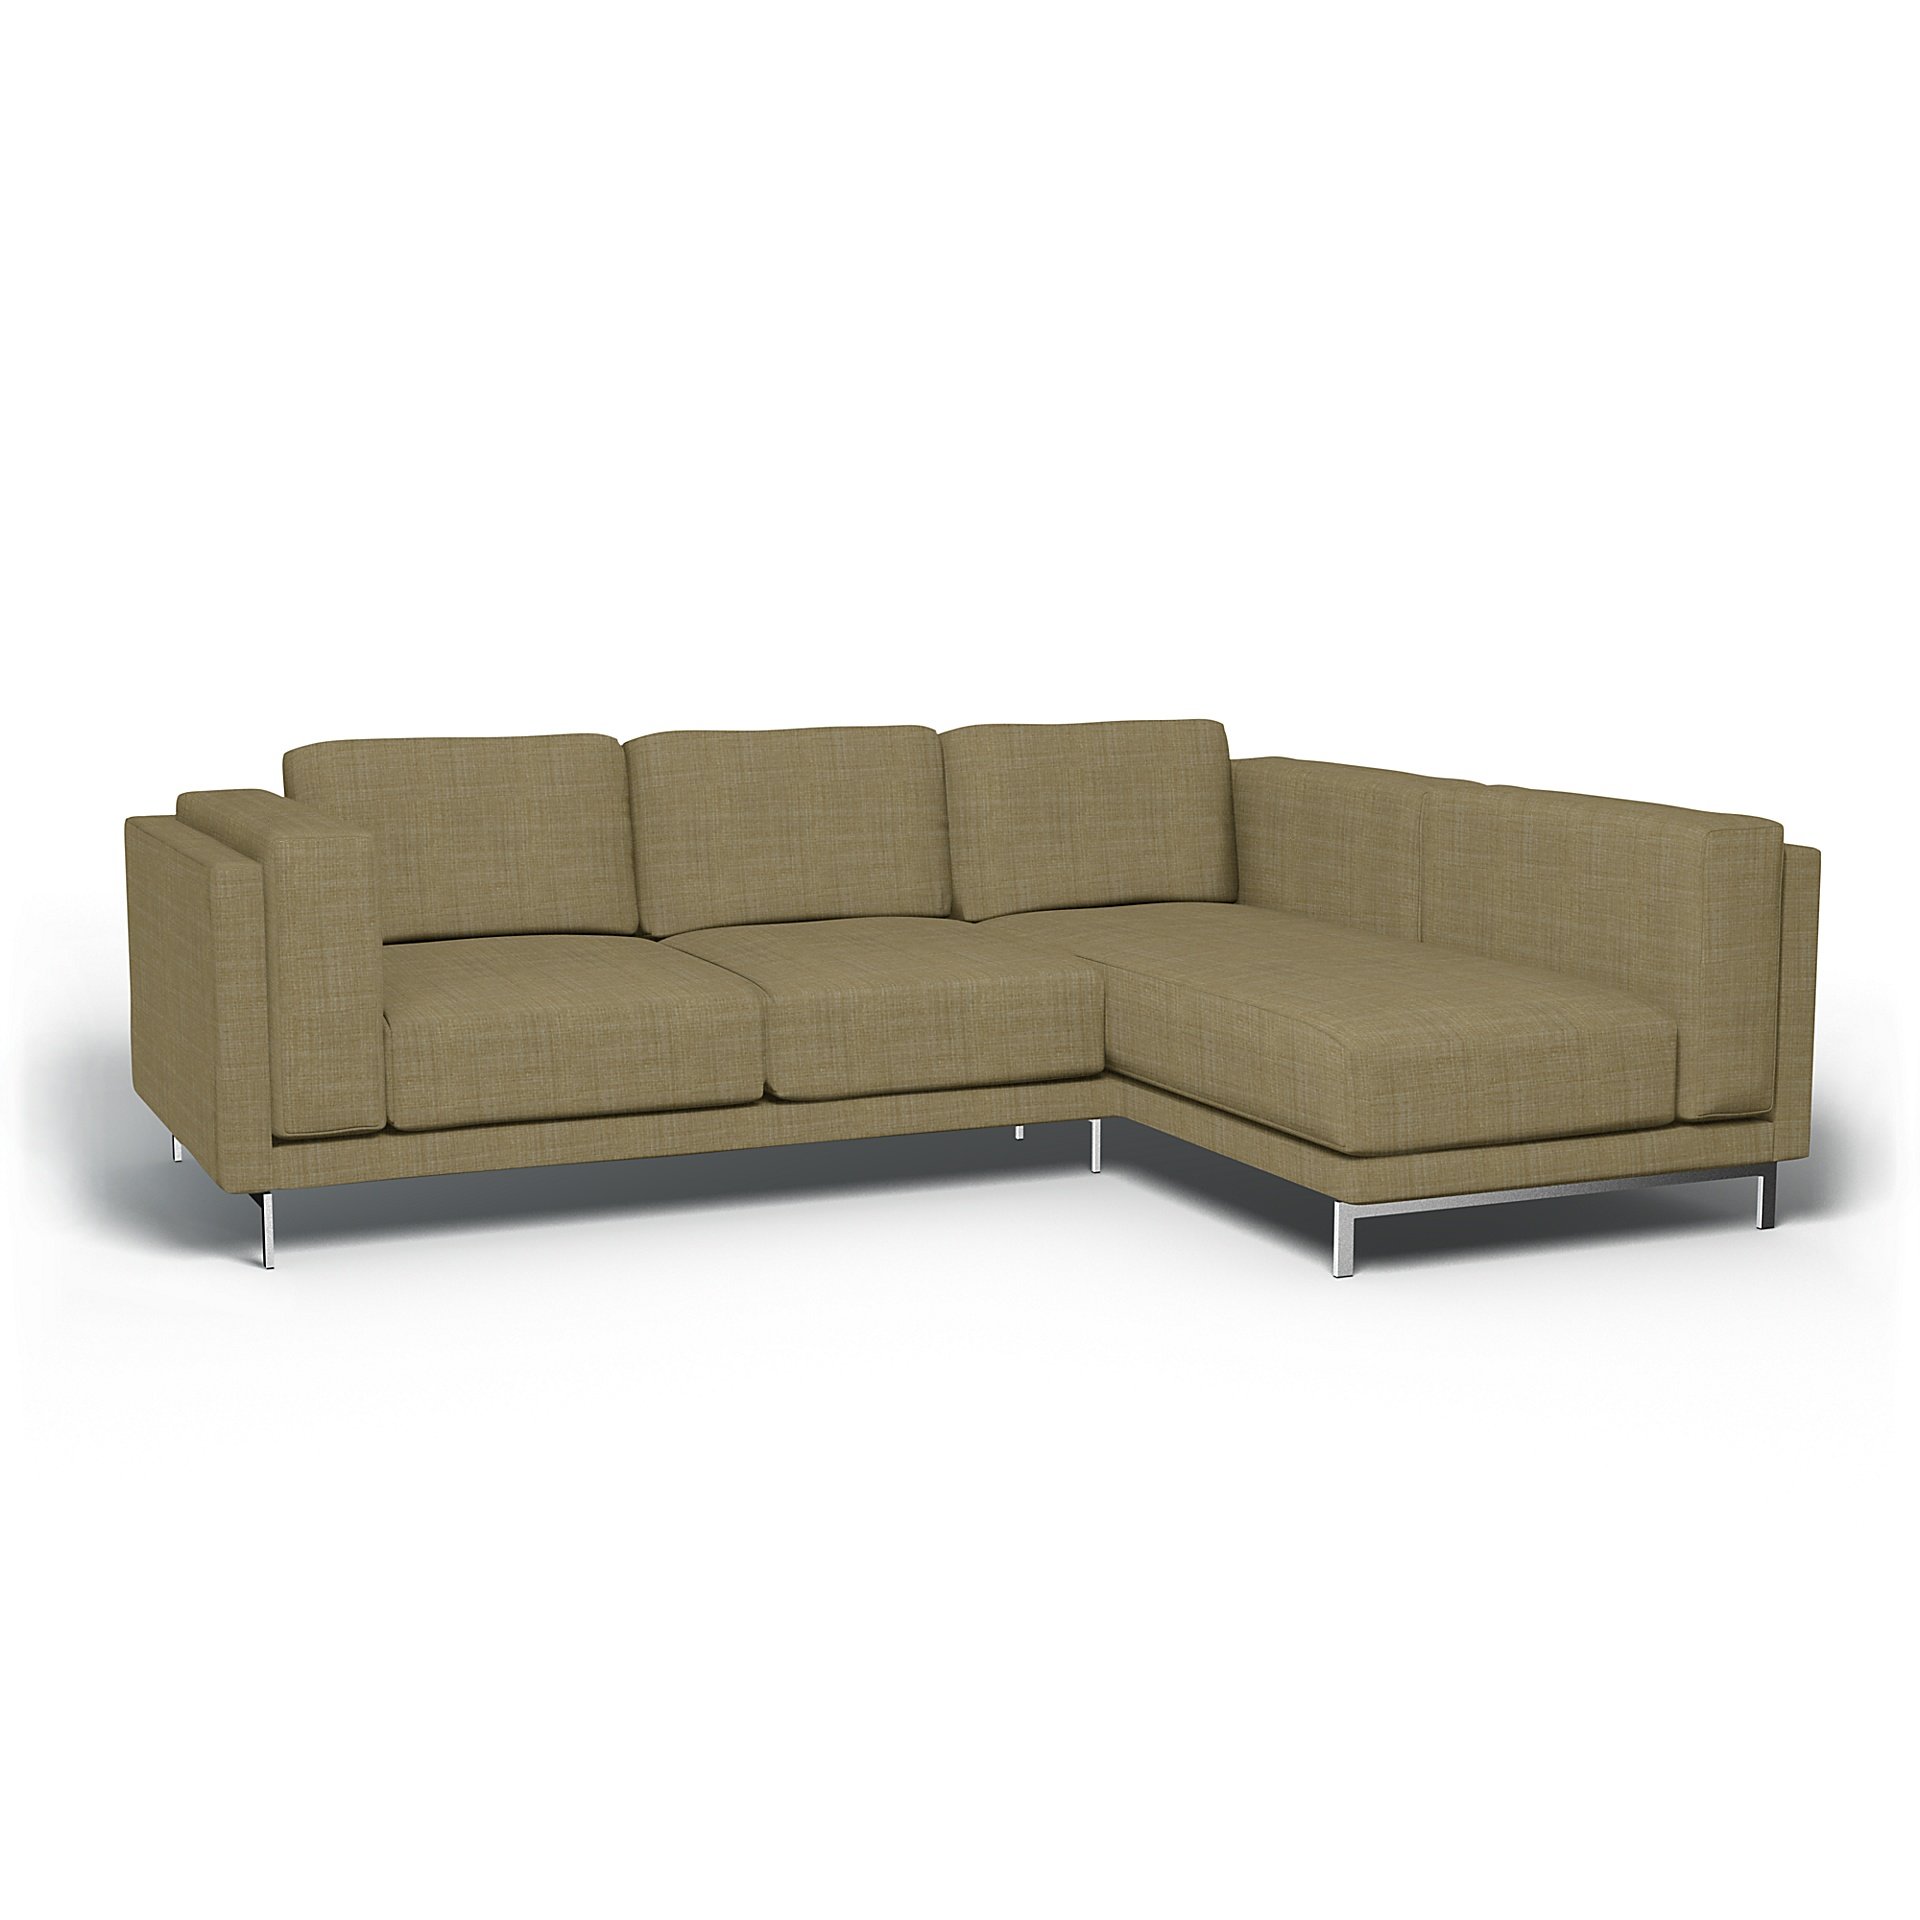 IKEA - Nockeby 3 Seat Sofa with Right Chaise Cover, Dusty Yellow, Boucle & Texture - Bemz